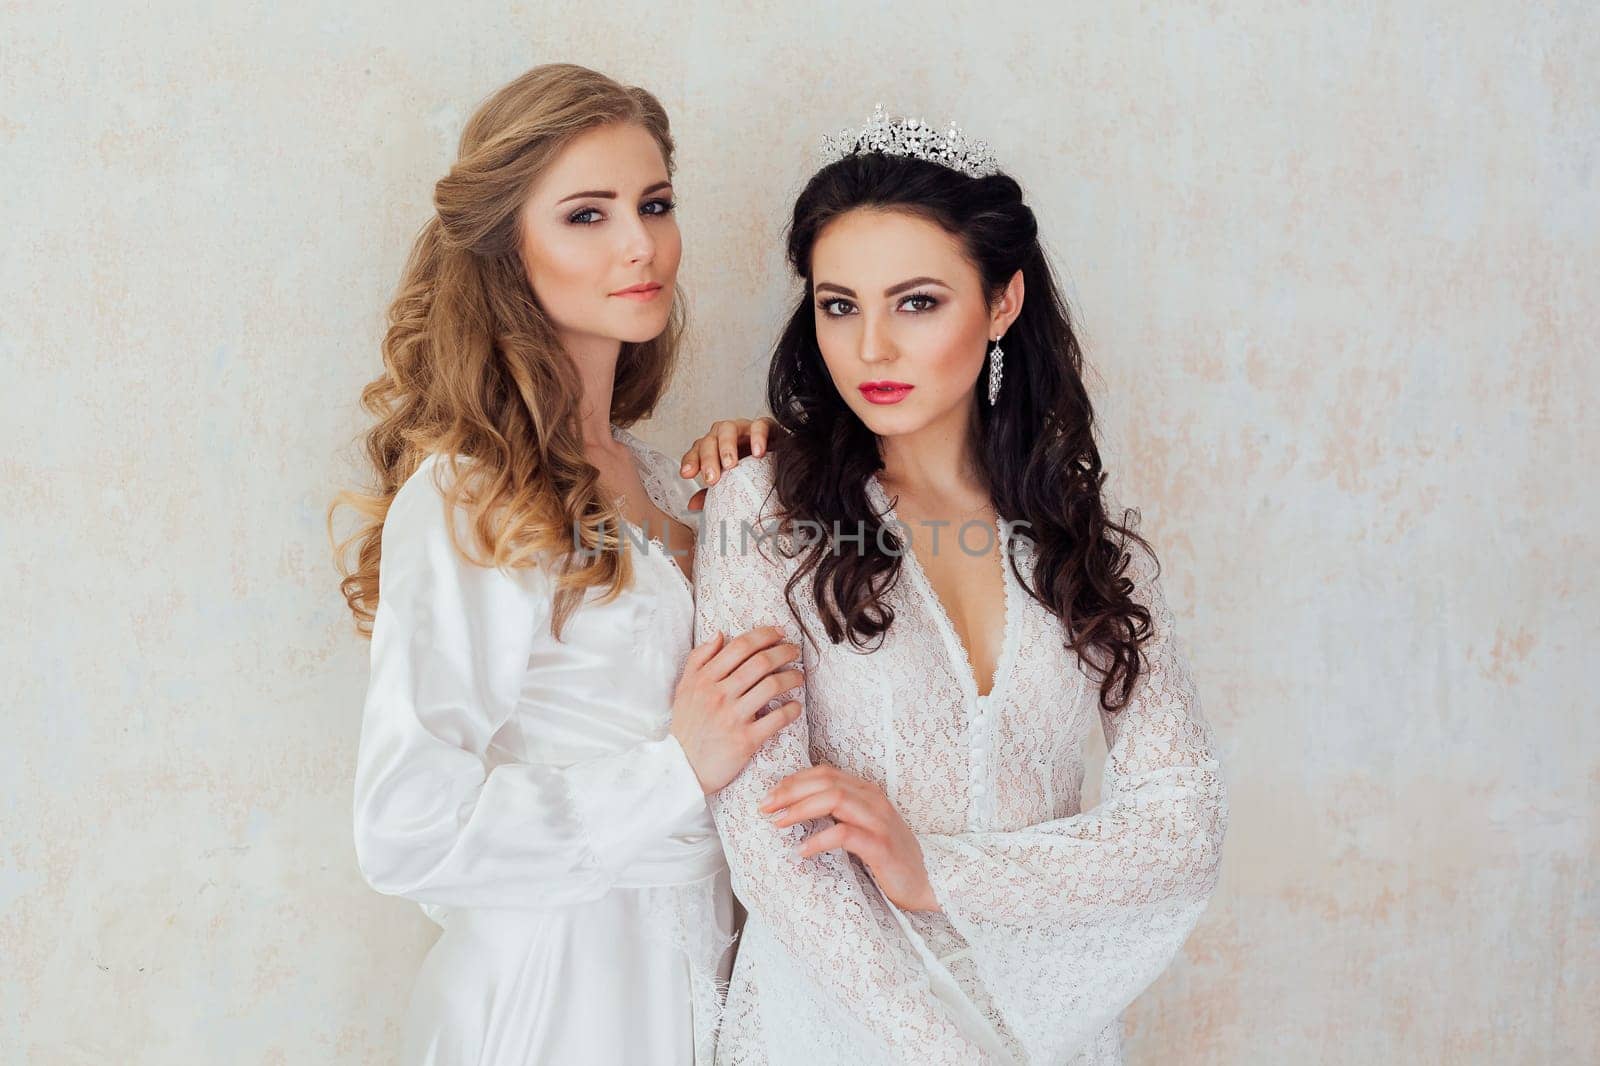 Portrait of two girls in white dresses wedding by Simakov